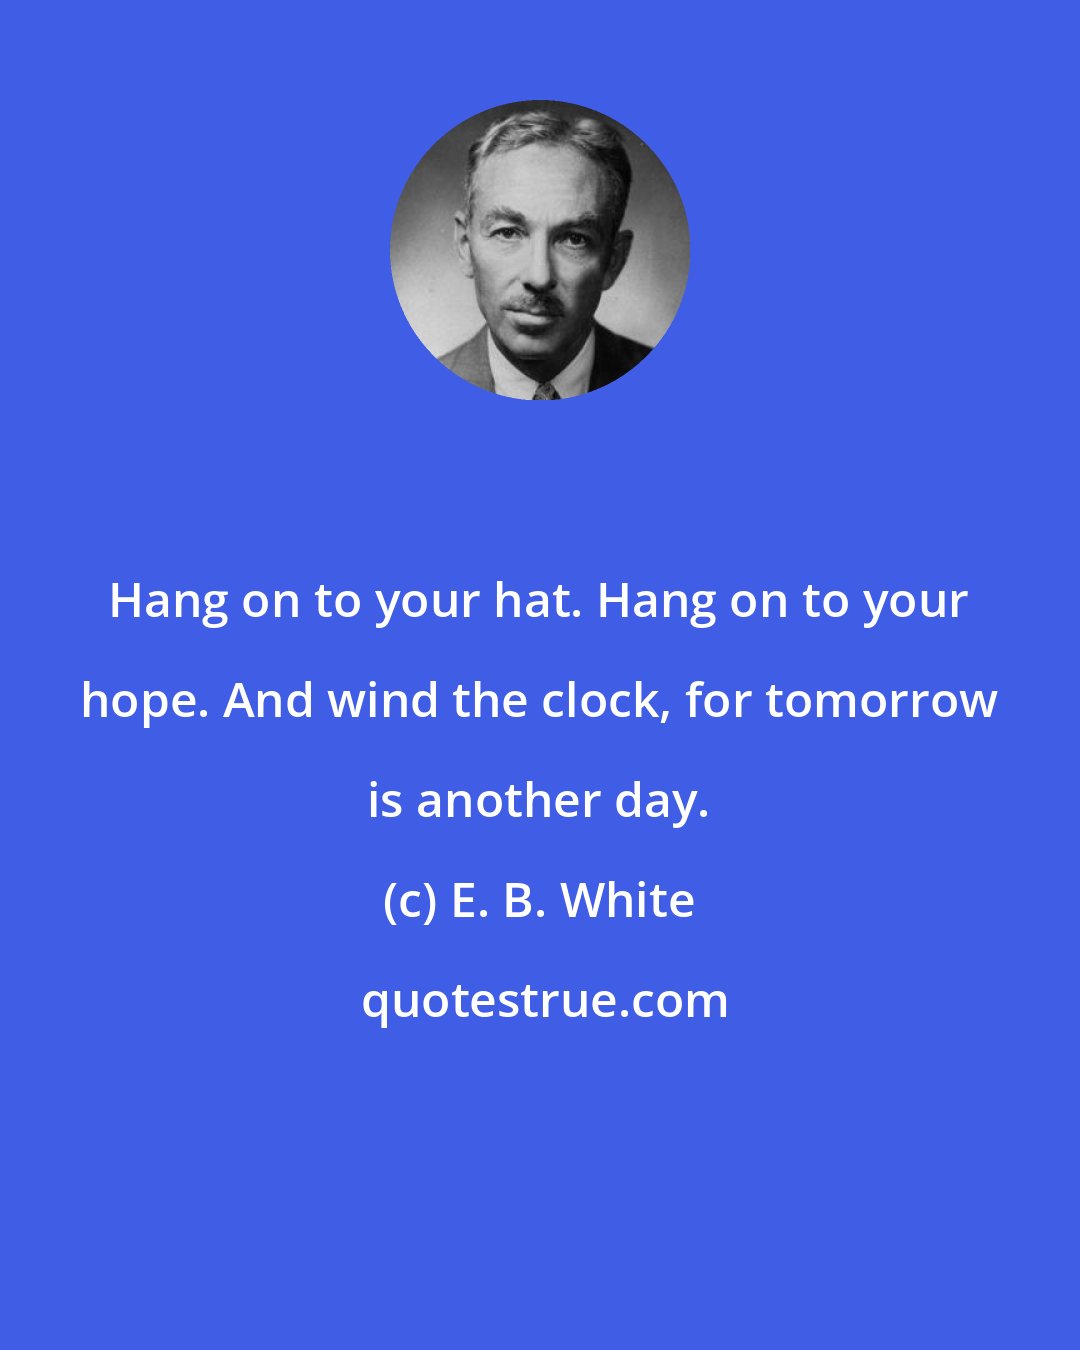 E. B. White: Hang on to your hat. Hang on to your hope. And wind the clock, for tomorrow is another day.